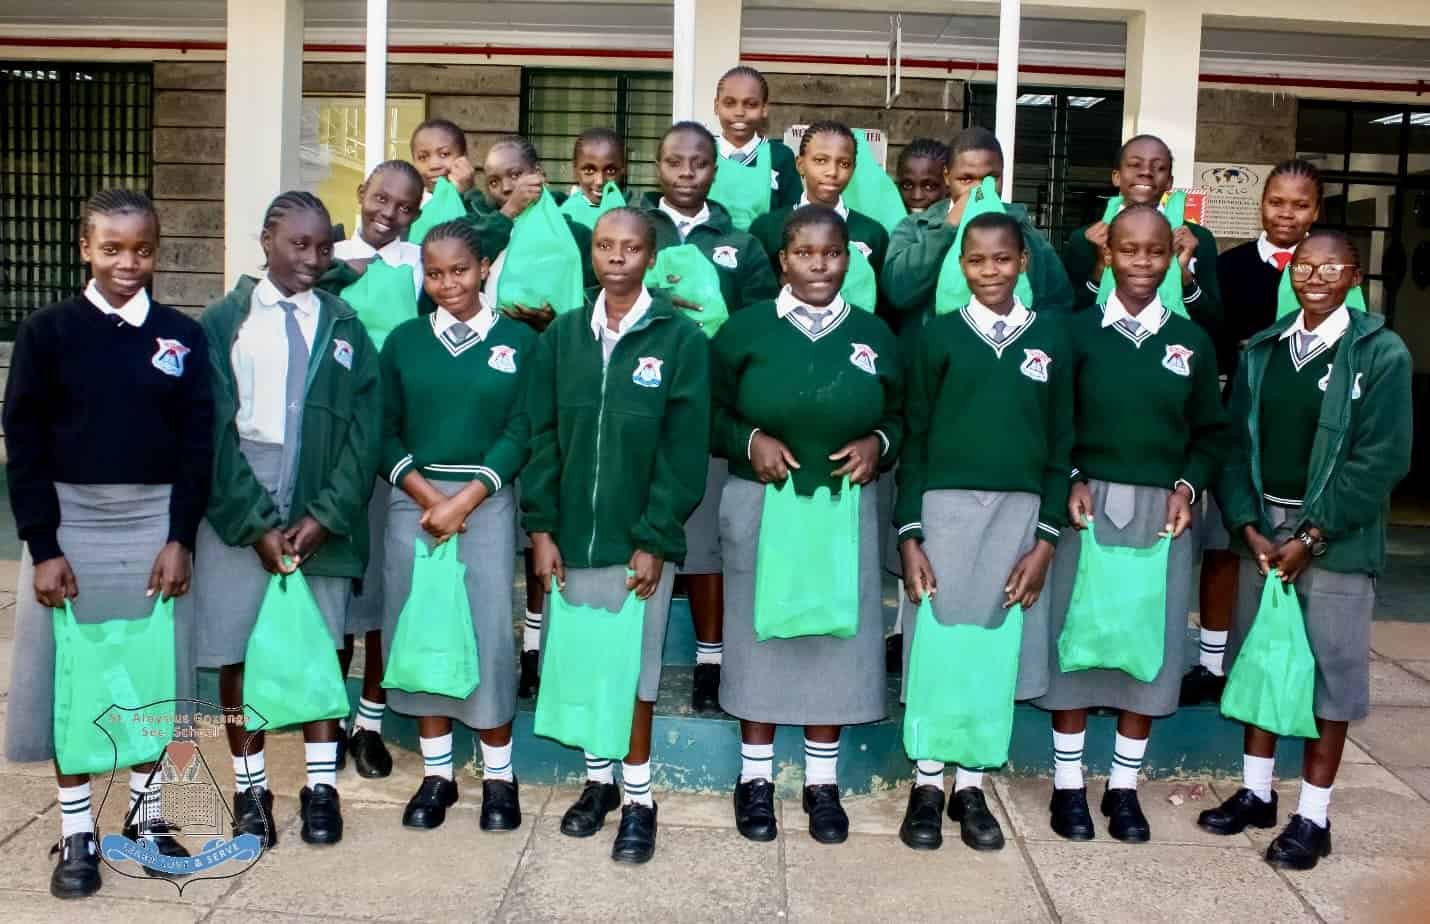 African girls stand in a group dressed in school uniforms and holding green plastic bags.